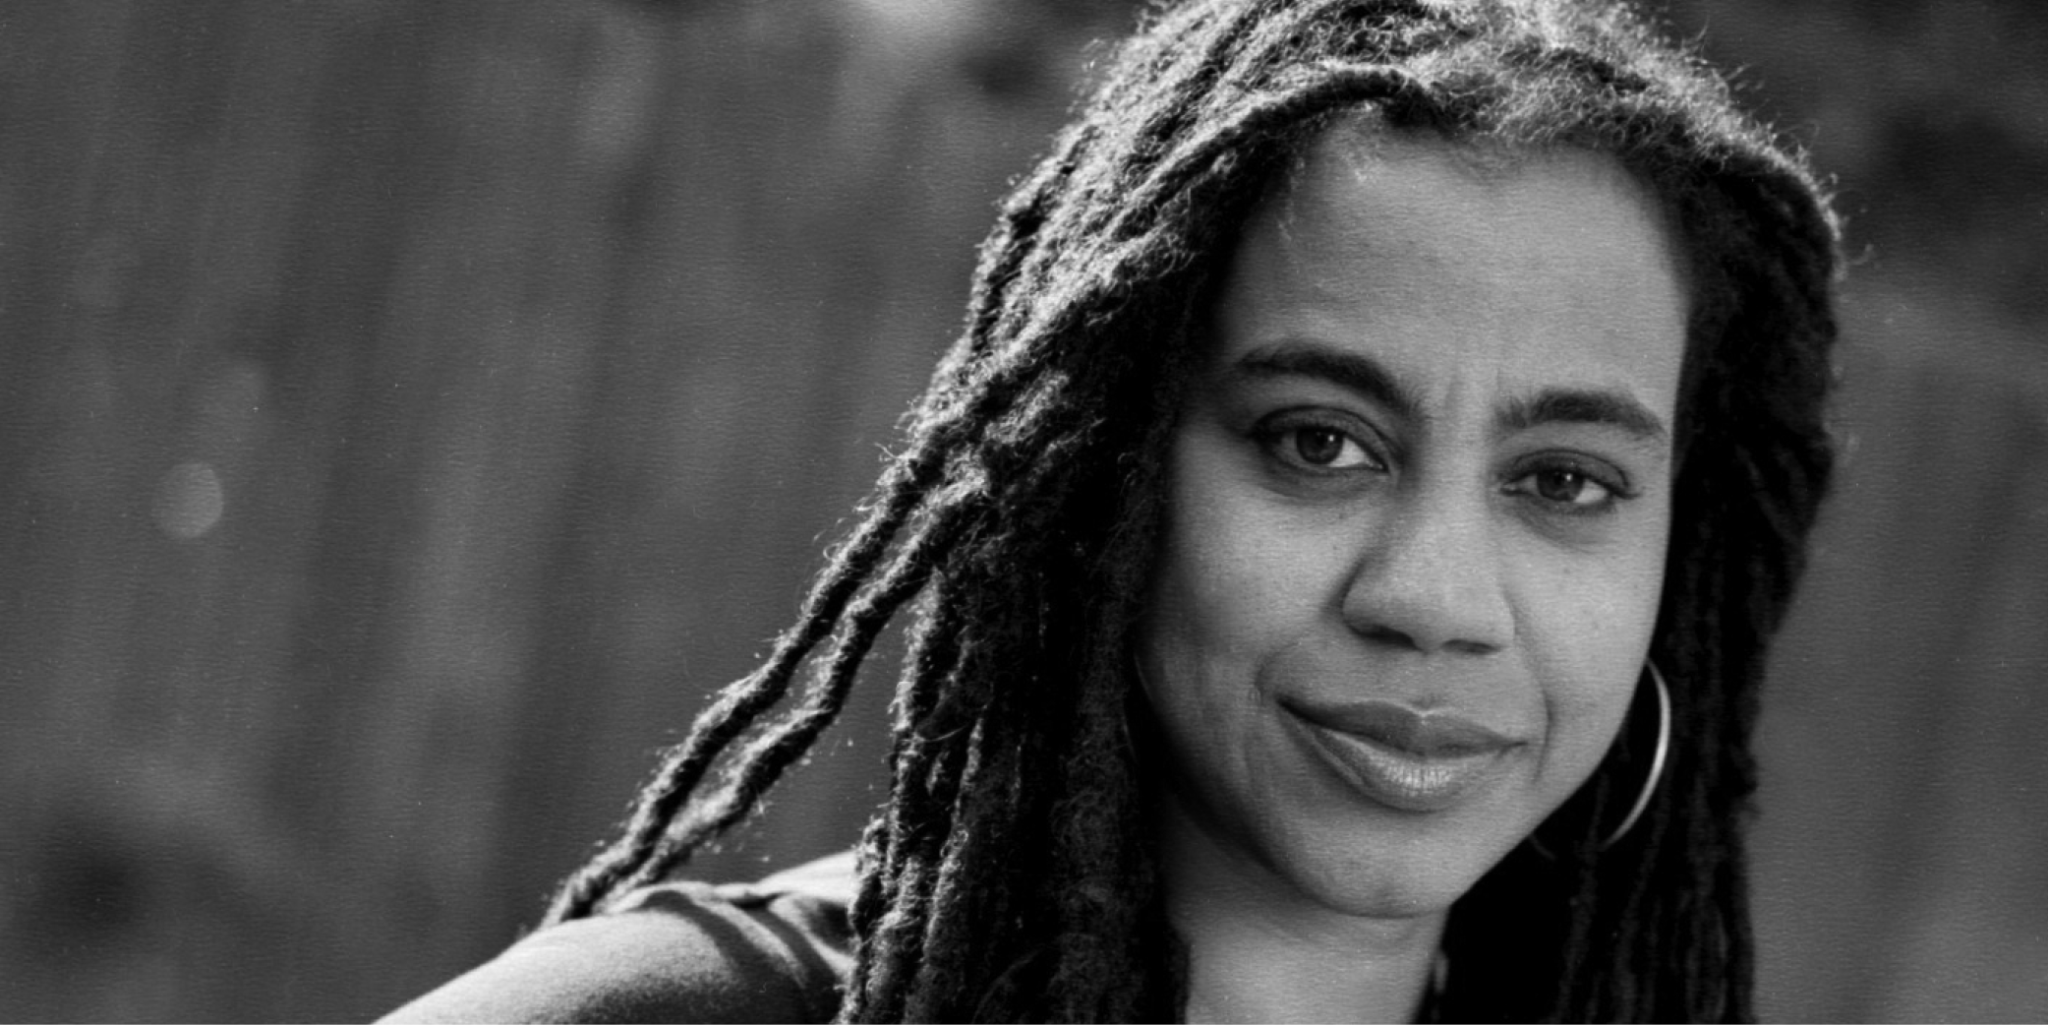 Writing Songs with Suzan-Lori Parks